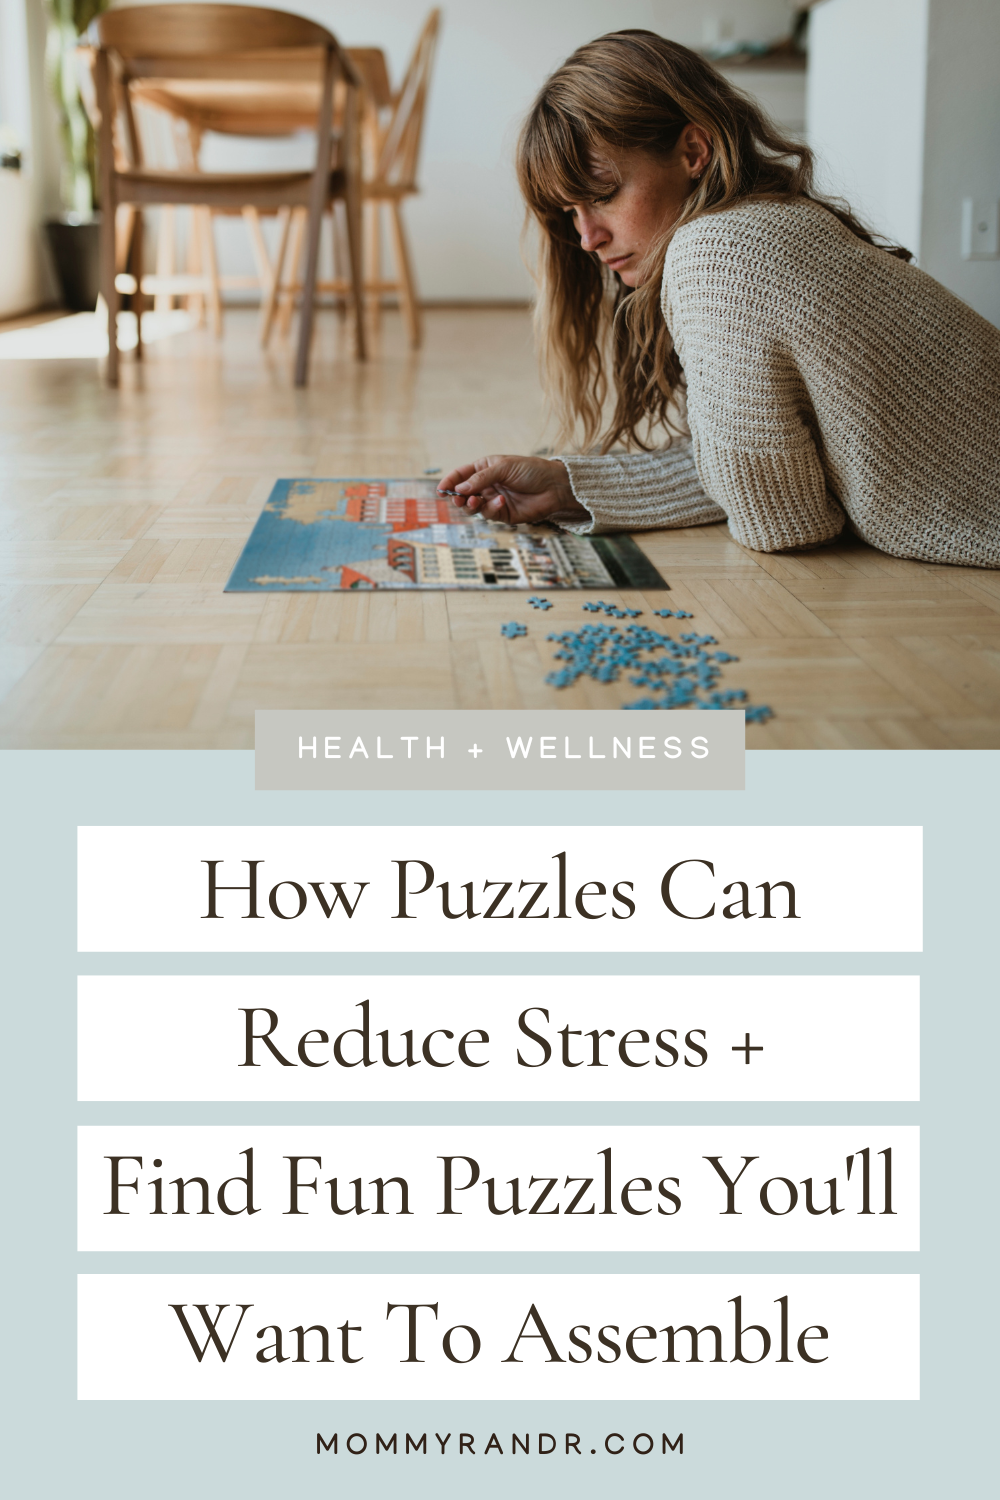 Puzzles can reduce stress - Woman assmebling puzzle on the floor